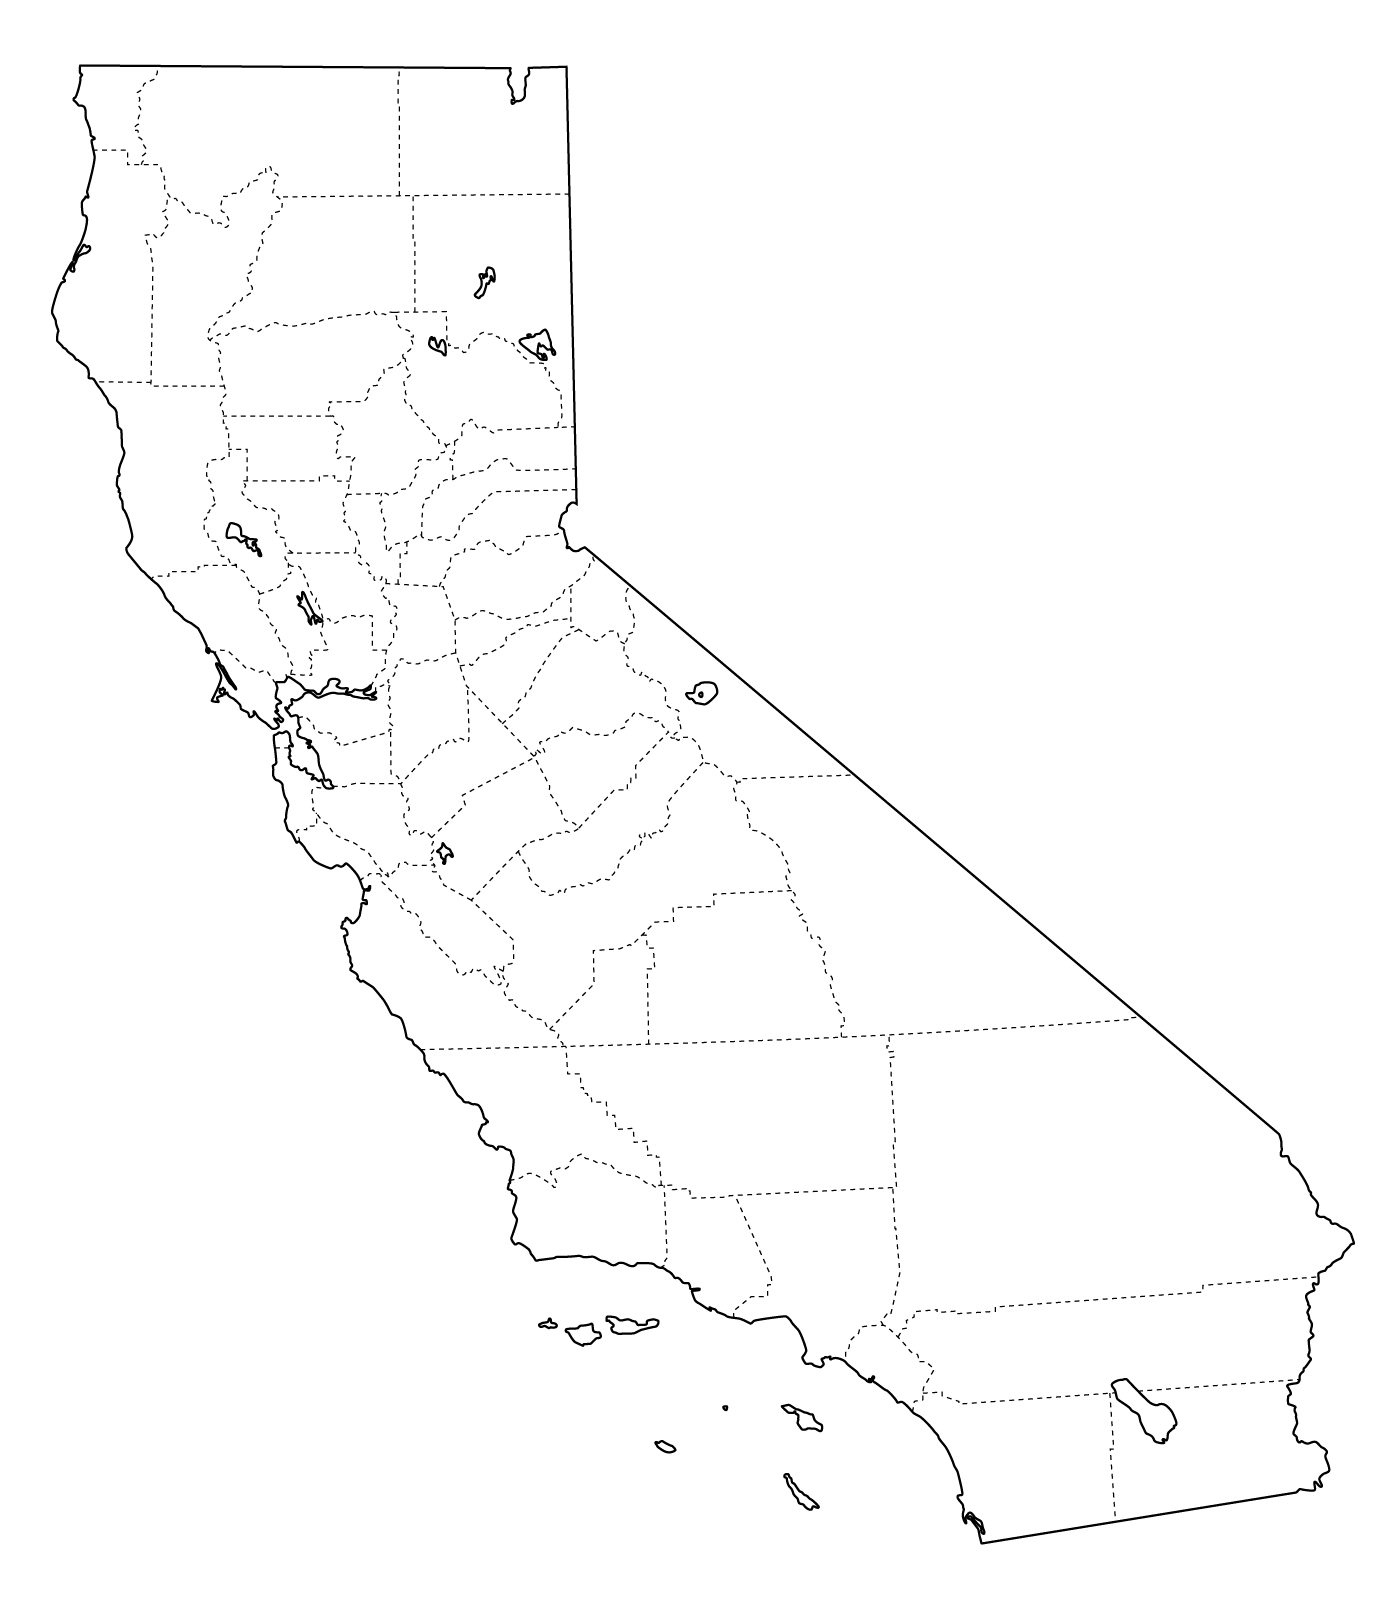 California Map With County Lines - Klipy - California Map With County Lines